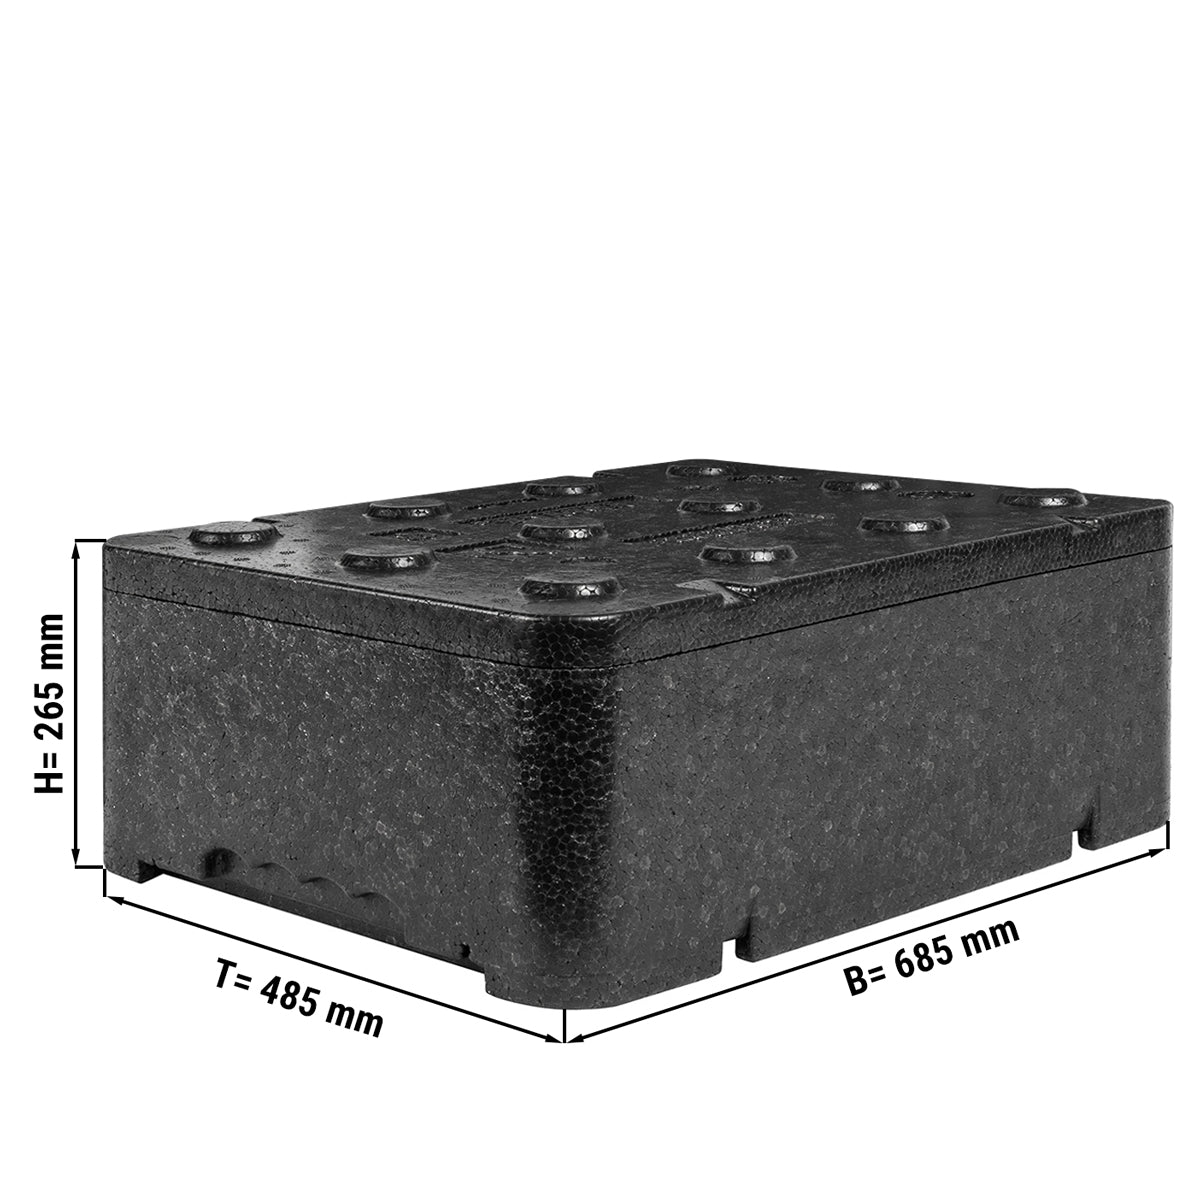 Thermobox / Polibox - for EN-ark - 685 x 485 x 265 mm